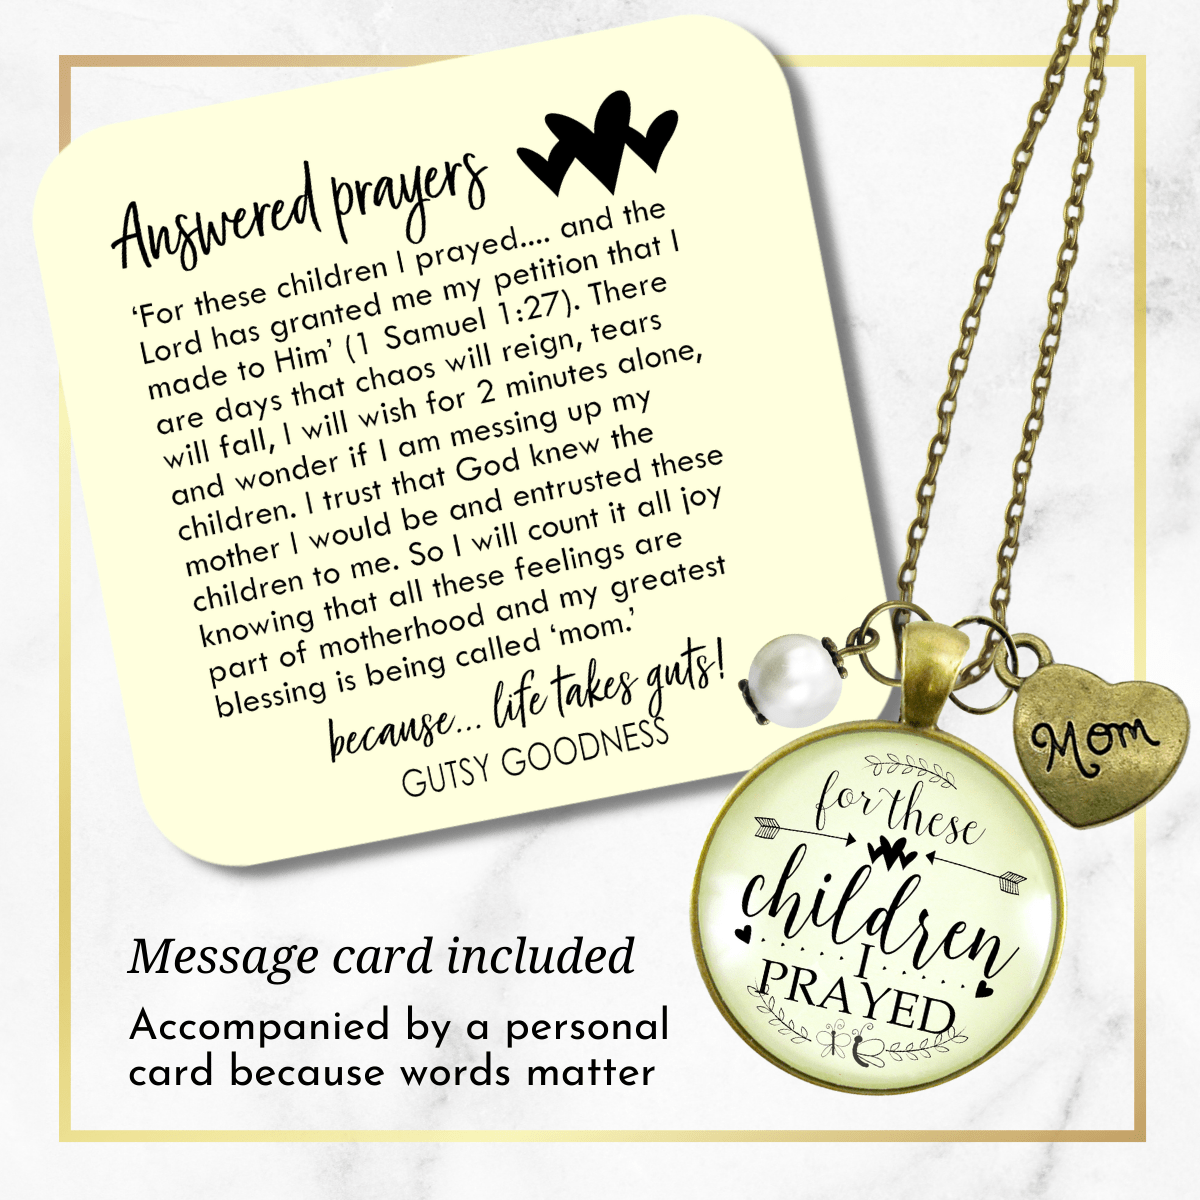 Gutsy Goodness Mother Necklace For These Children I Prayed Christian Mom Faith Charm - Gutsy Goodness Handmade Jewelry;For These Children I Prayed Mom - Gutsy Goodness Handmade Jewelry Gifts